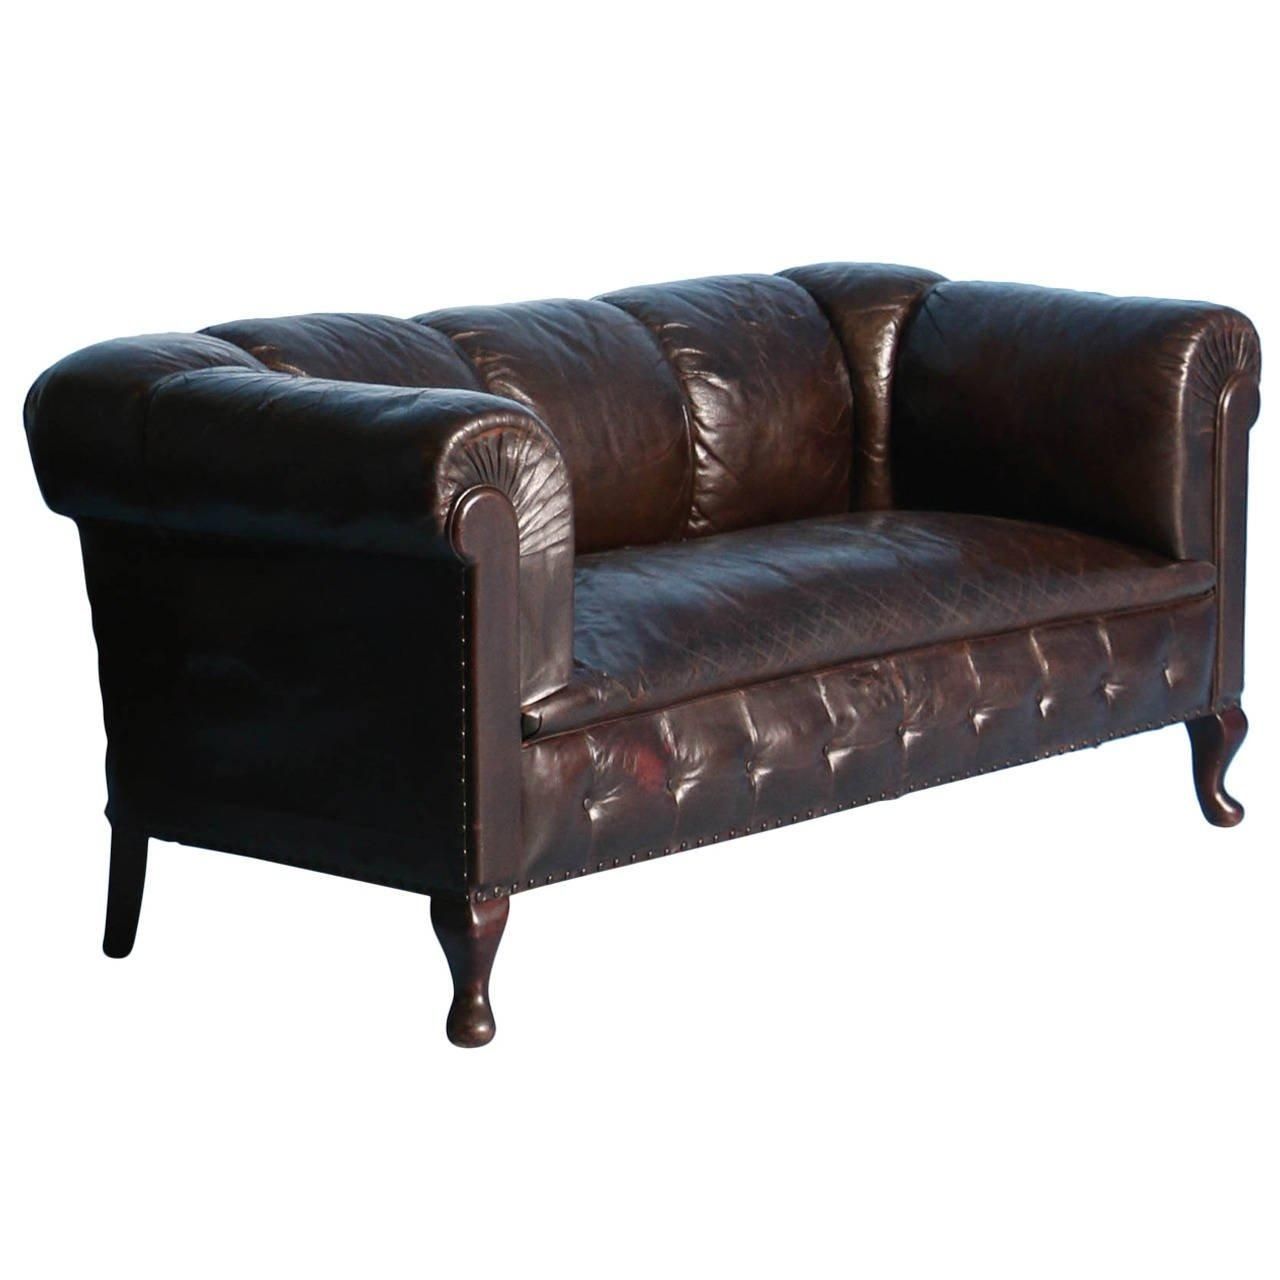 Small Vintage Chesterfield Sofa, England, Circa 1920 – 1940 At 1stdibs For Small Chesterfield Sofas (View 13 of 20)